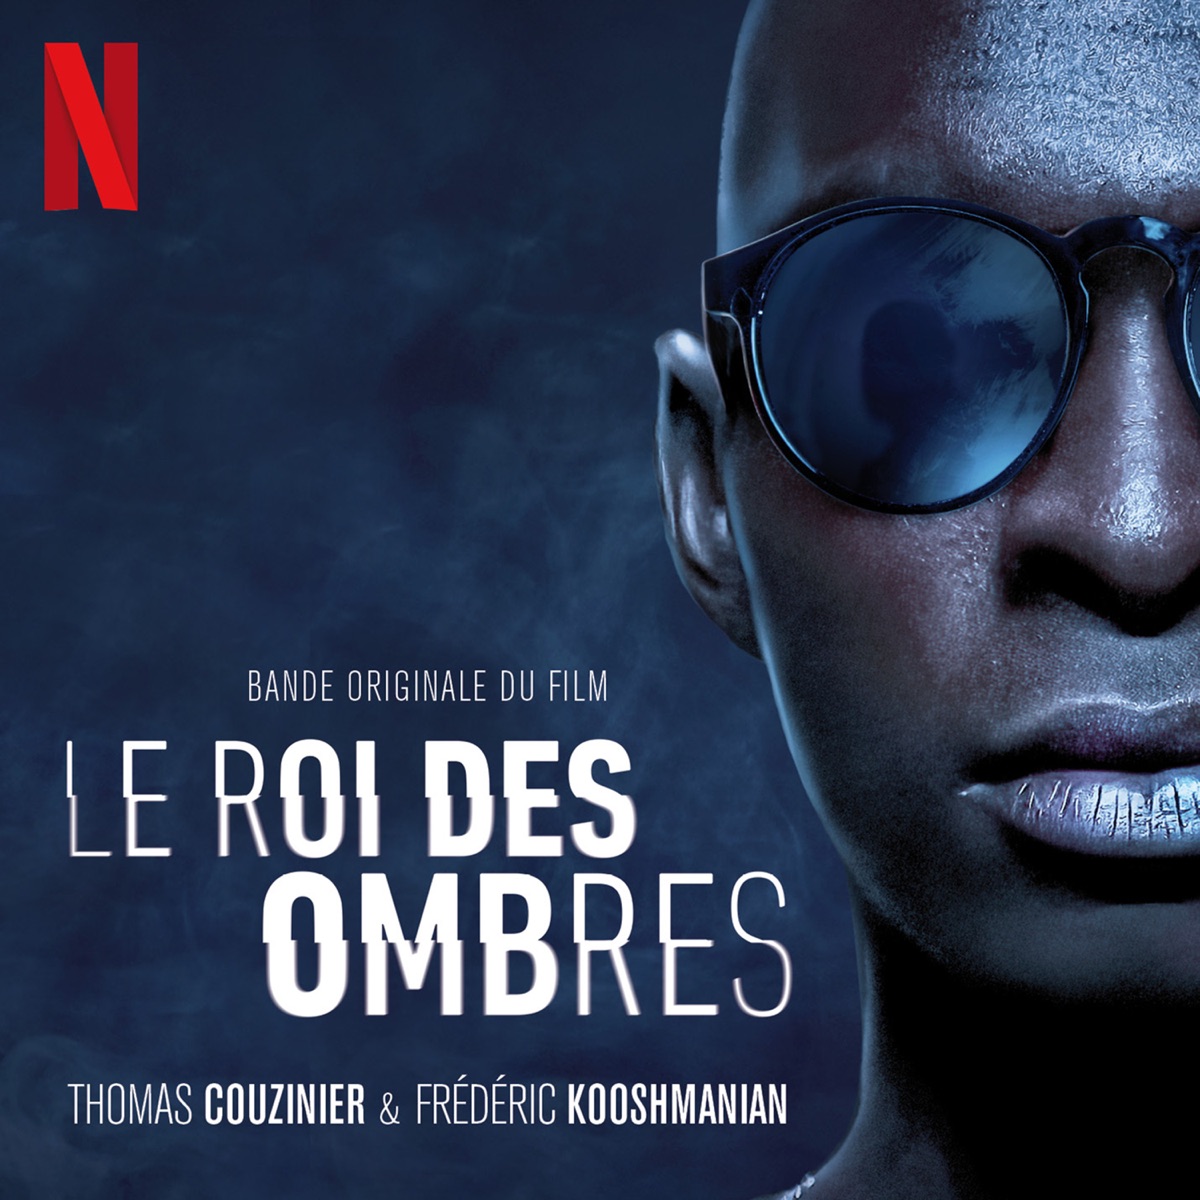 Le roi des ombres (Soundtrack from the Netflix Film) by Thomas Couzinier &  Frédéric Kooshmanian on Apple Music